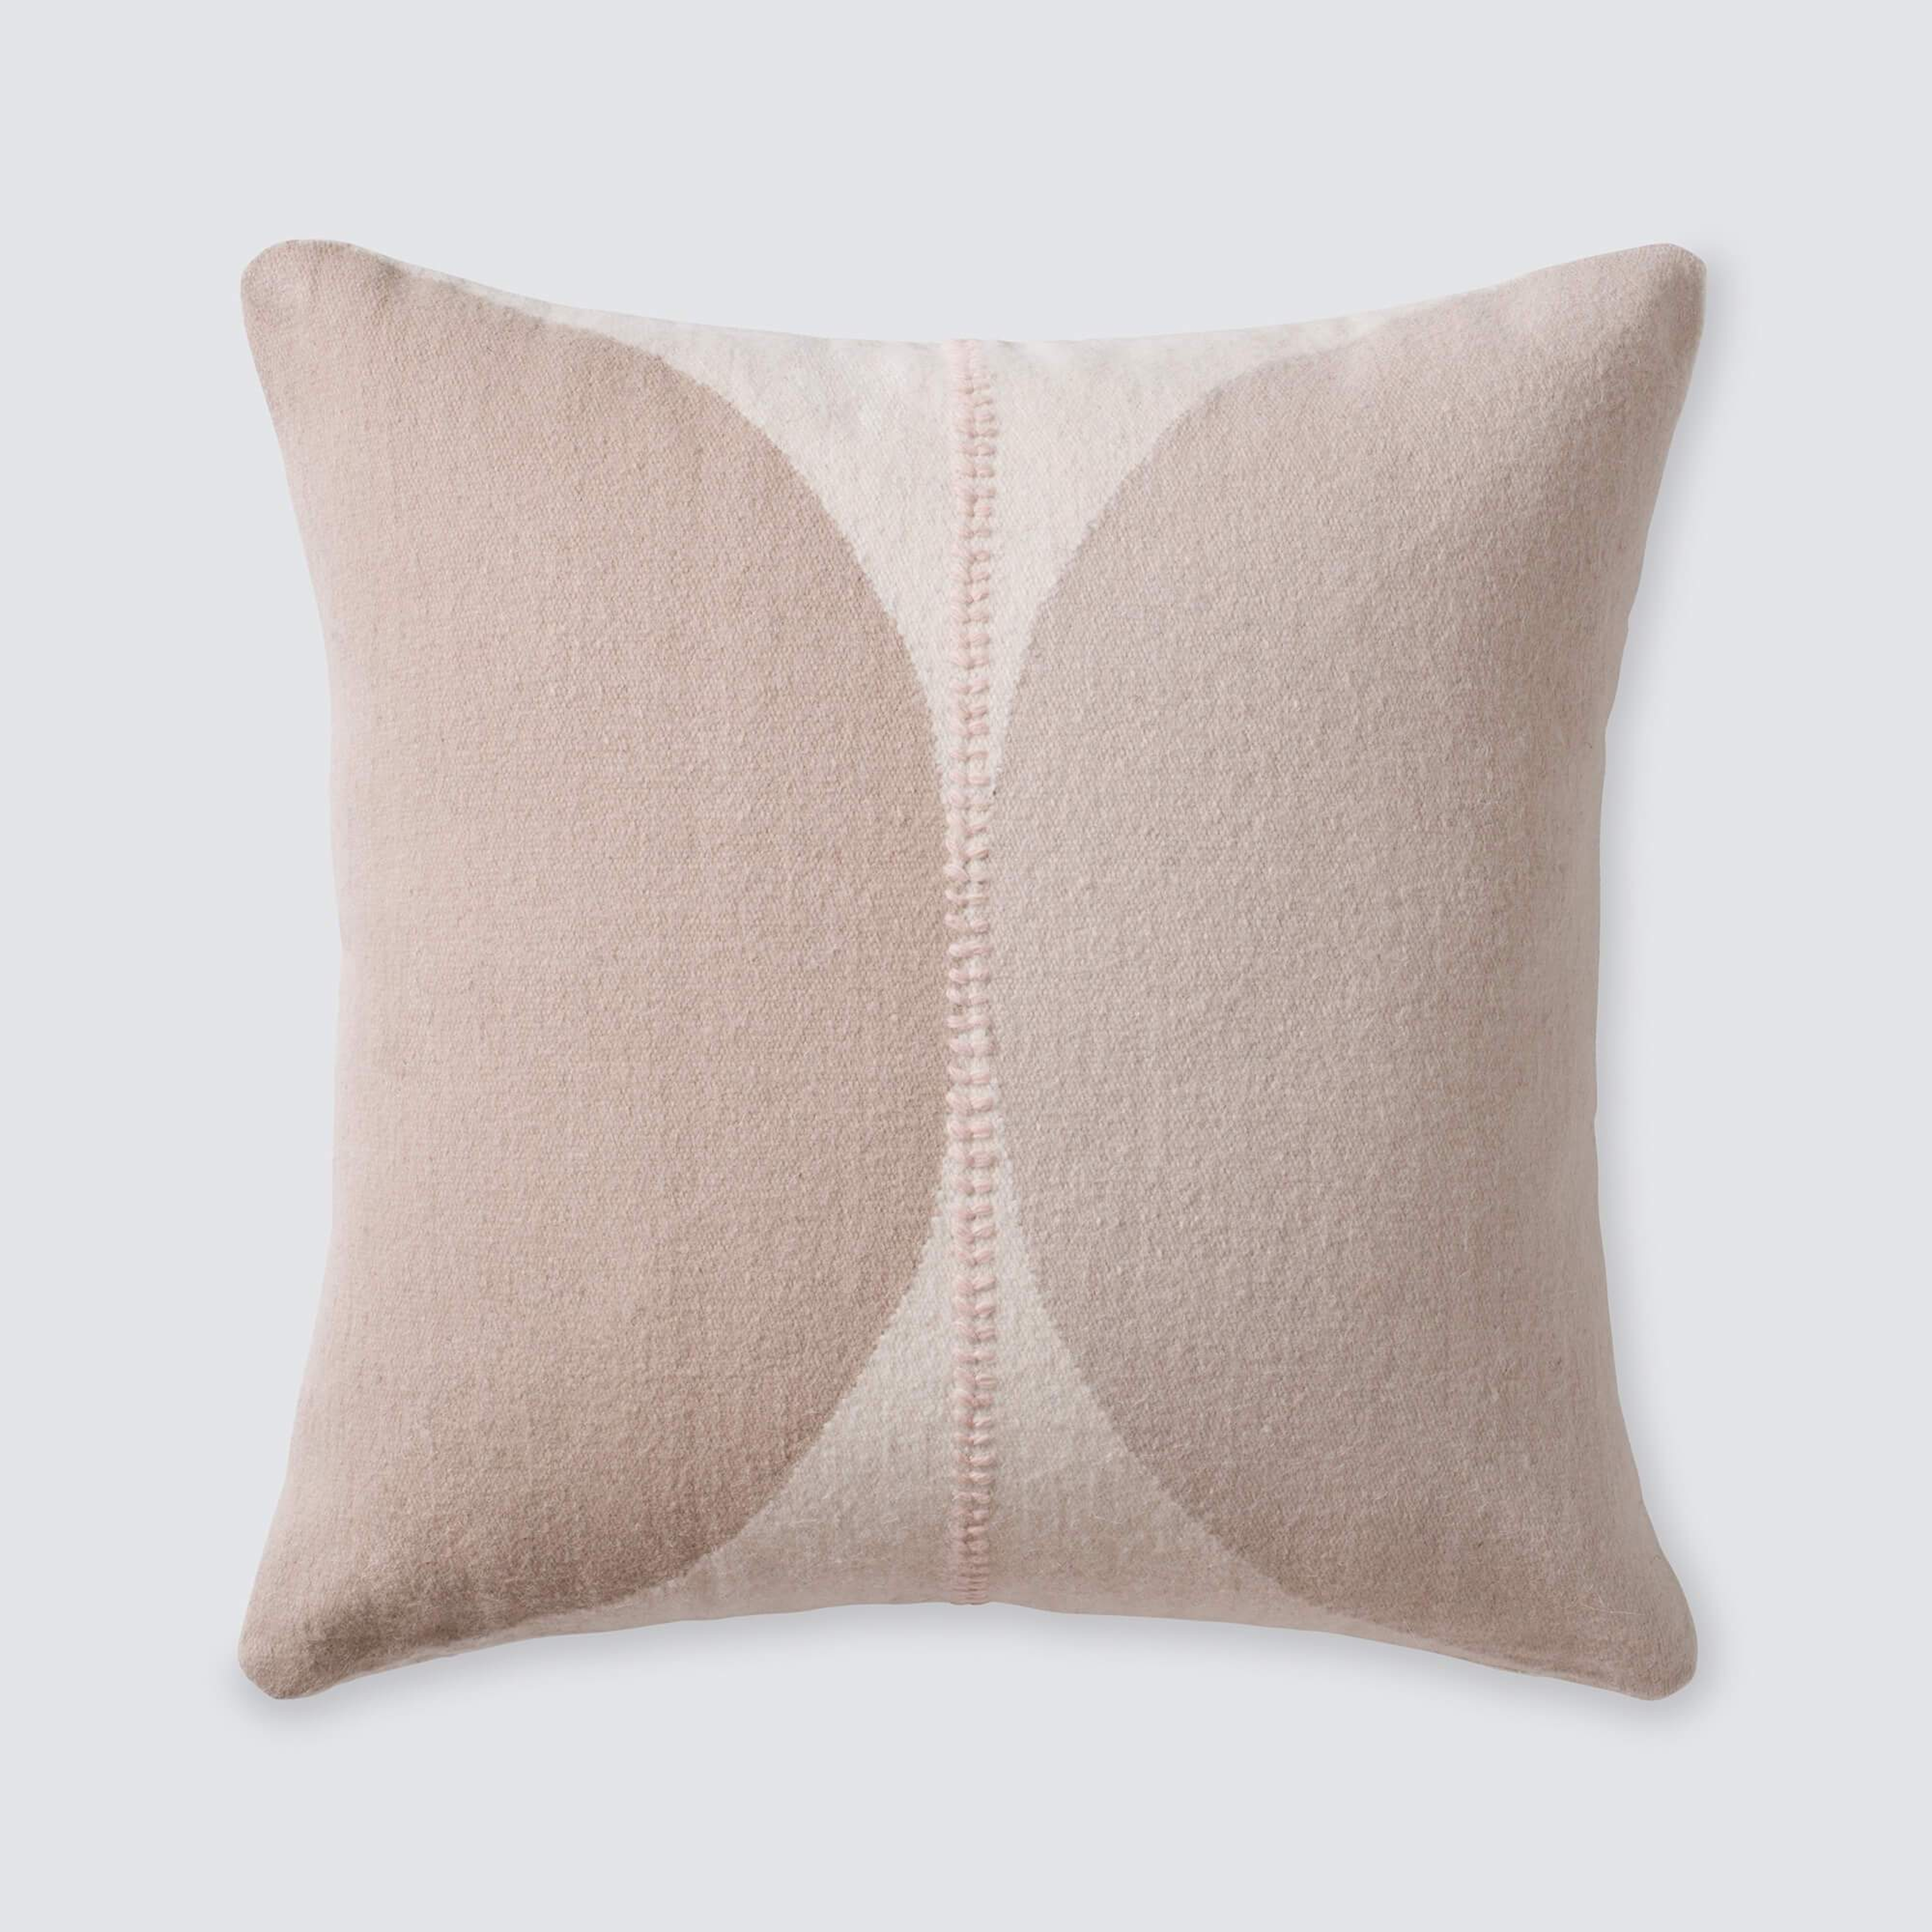 Resol Pillow By The Citizenry - The Citizenry